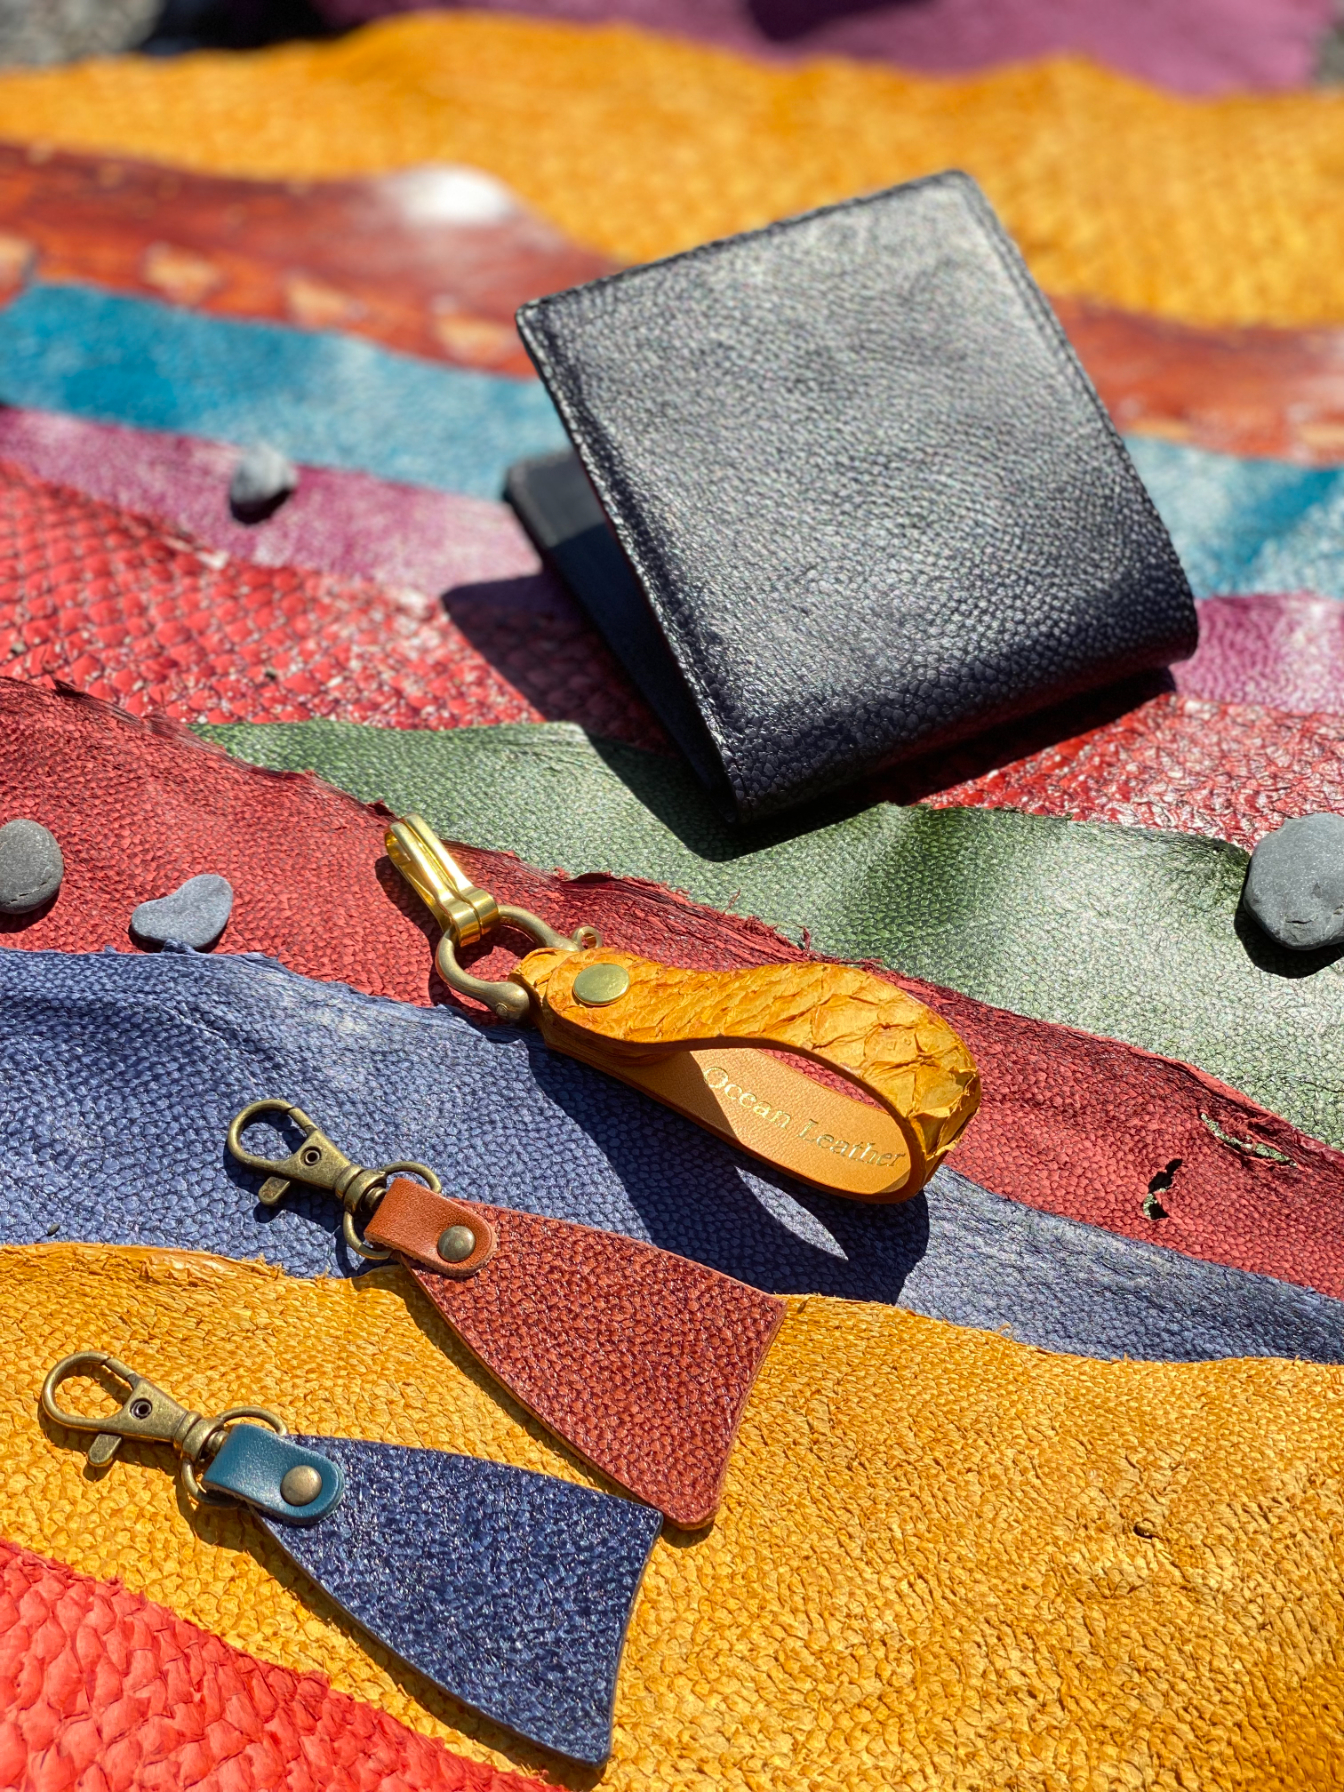 Fish leather wallets and keyrings are among the products on the market. &nbsp; &nbsp; Source: Ocean Leather&nbsp; &nbsp; &nbsp;